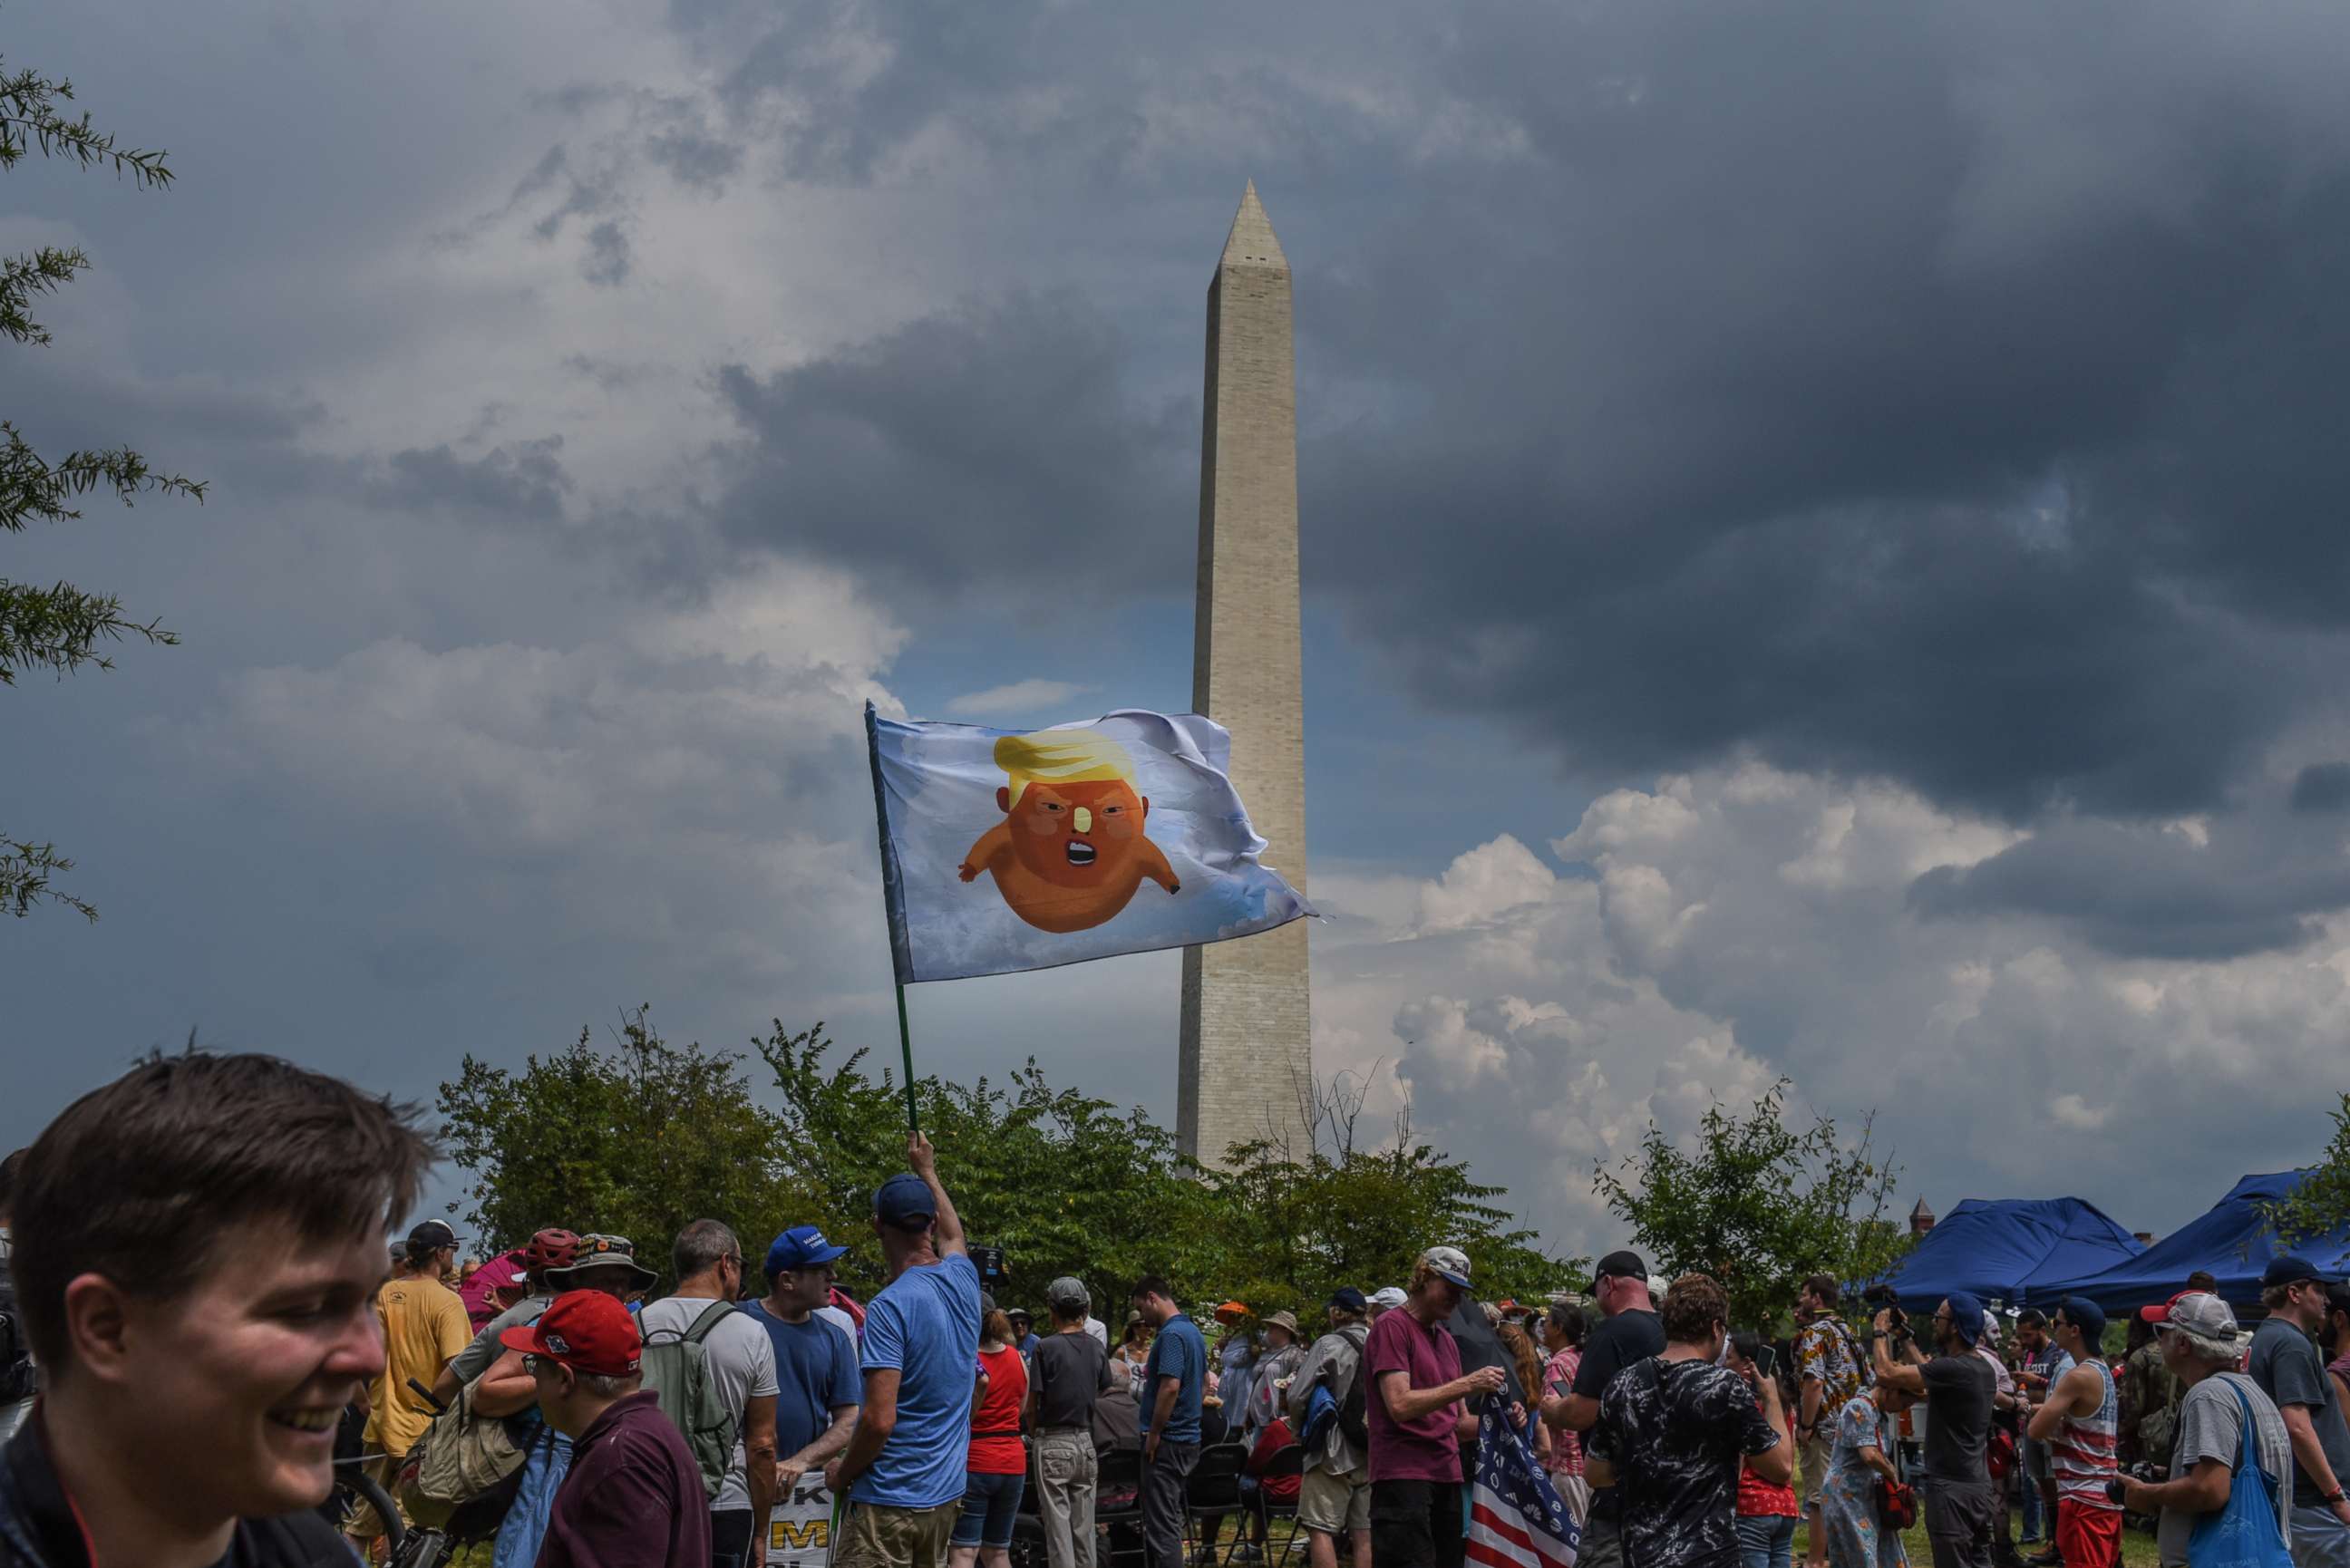 PHOTO: People gather on the National Mall ahead of President Trump's speech during Fourth of July festivities on July 4, 2019 in Washington.